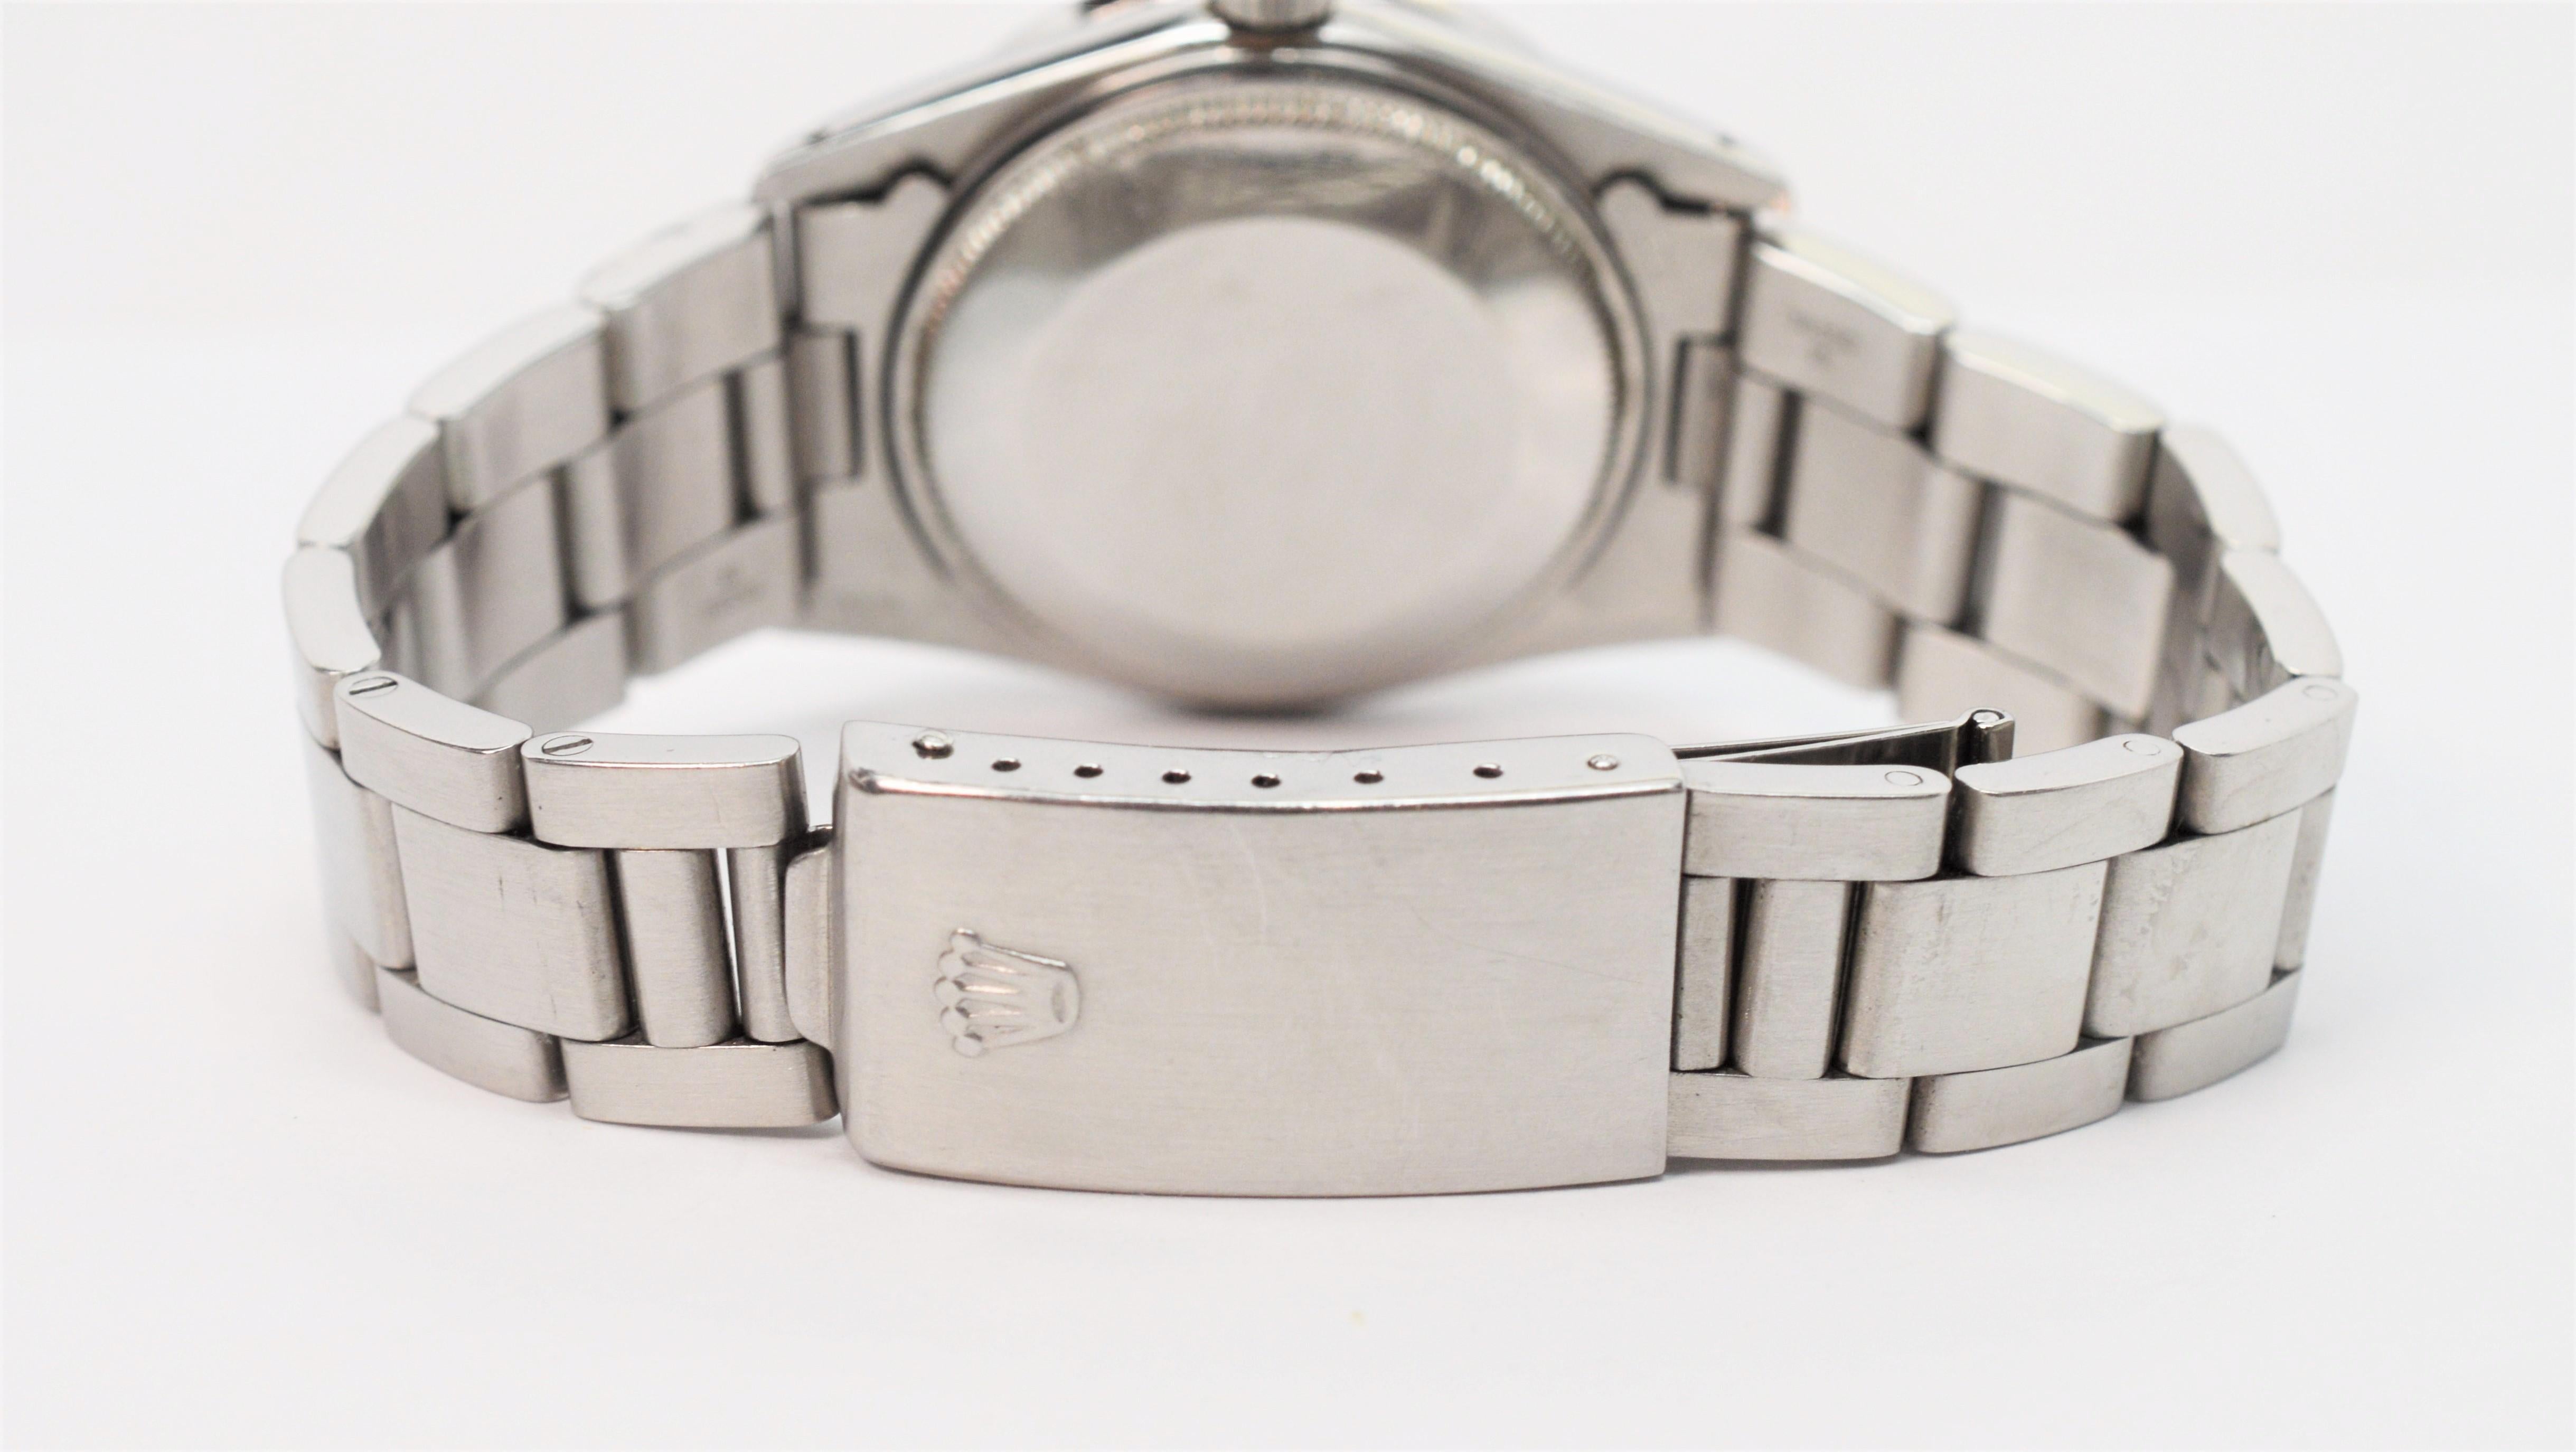 Rolex Men's Stainless Steel Model 15010 Oyster Wrist Watch In Good Condition For Sale In Mount Kisco, NY